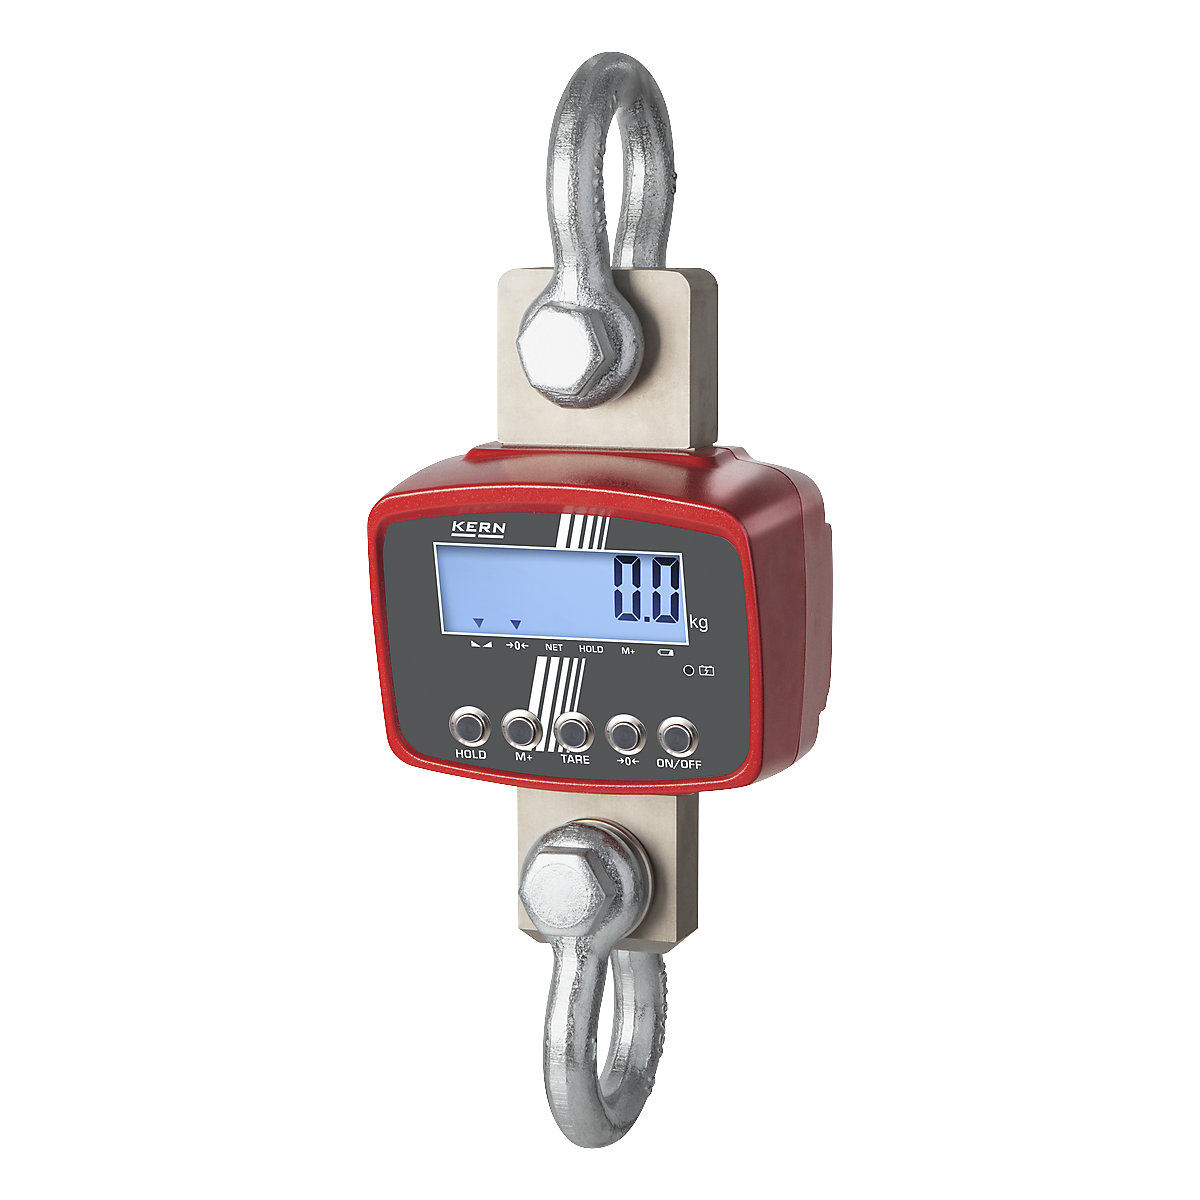 Crane scales – KERN, high resolution, weighing range up to 12000 kg, read-out accuracy 1000 / 2000 / 5000 g-1